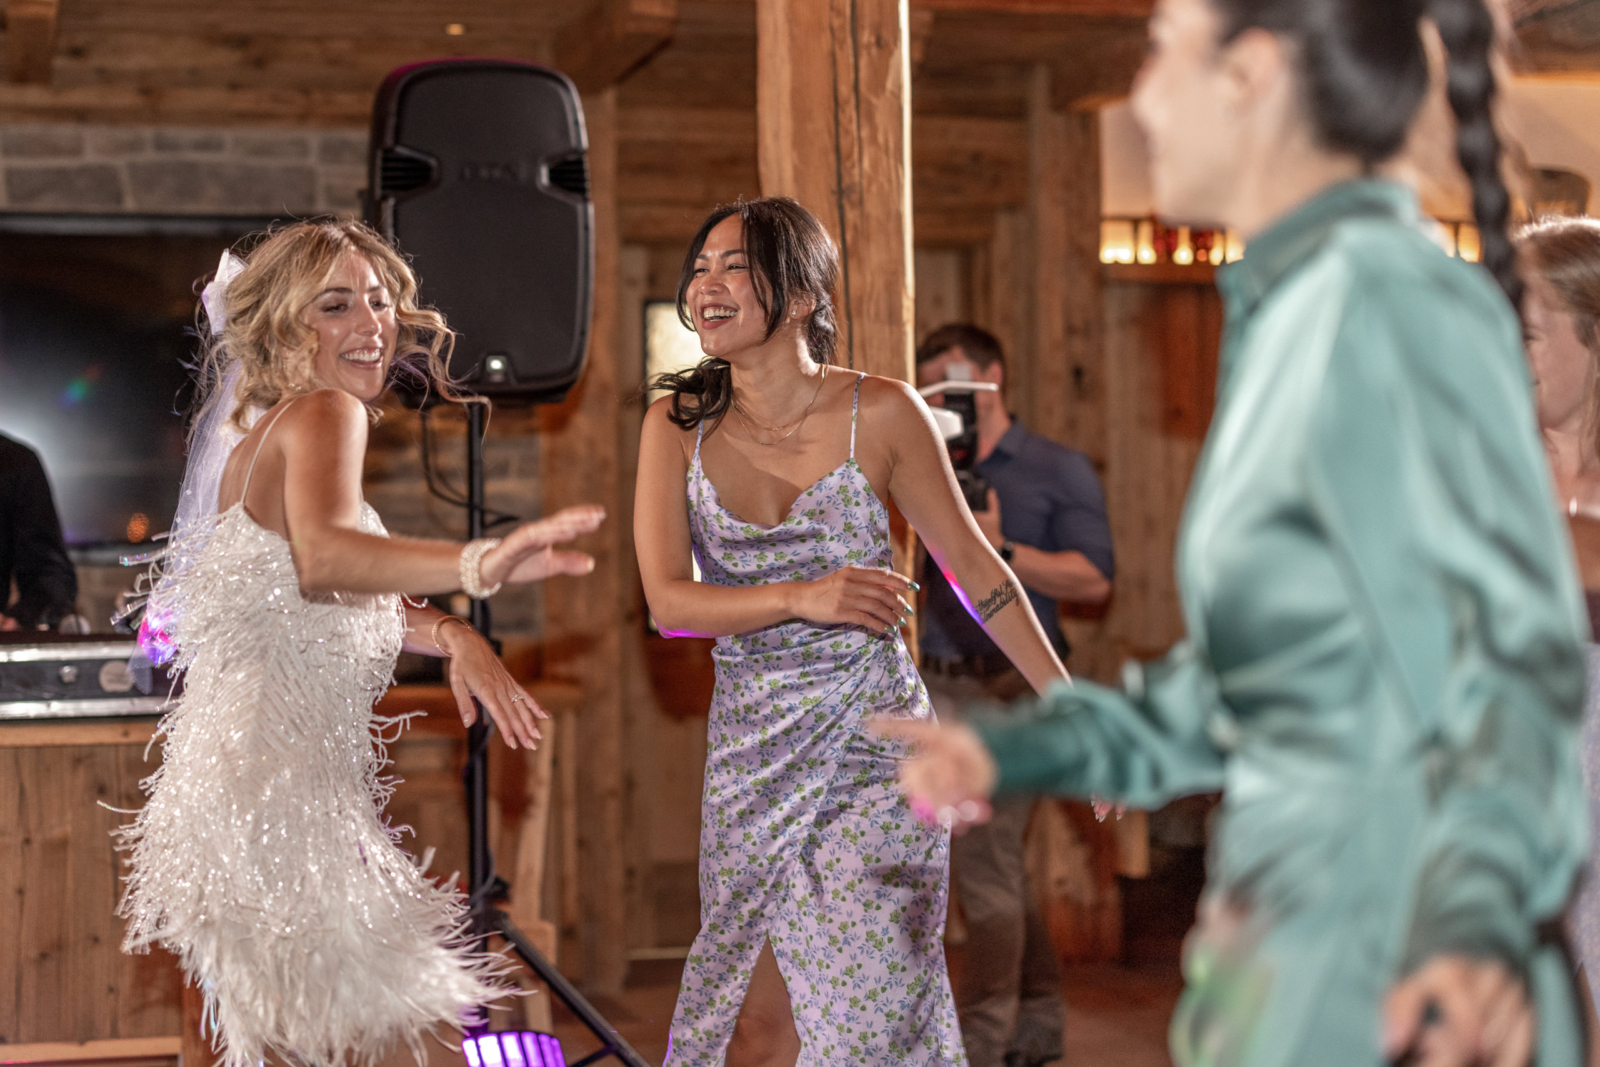 Dancing and Celbration of the destination wedding in Tyrol